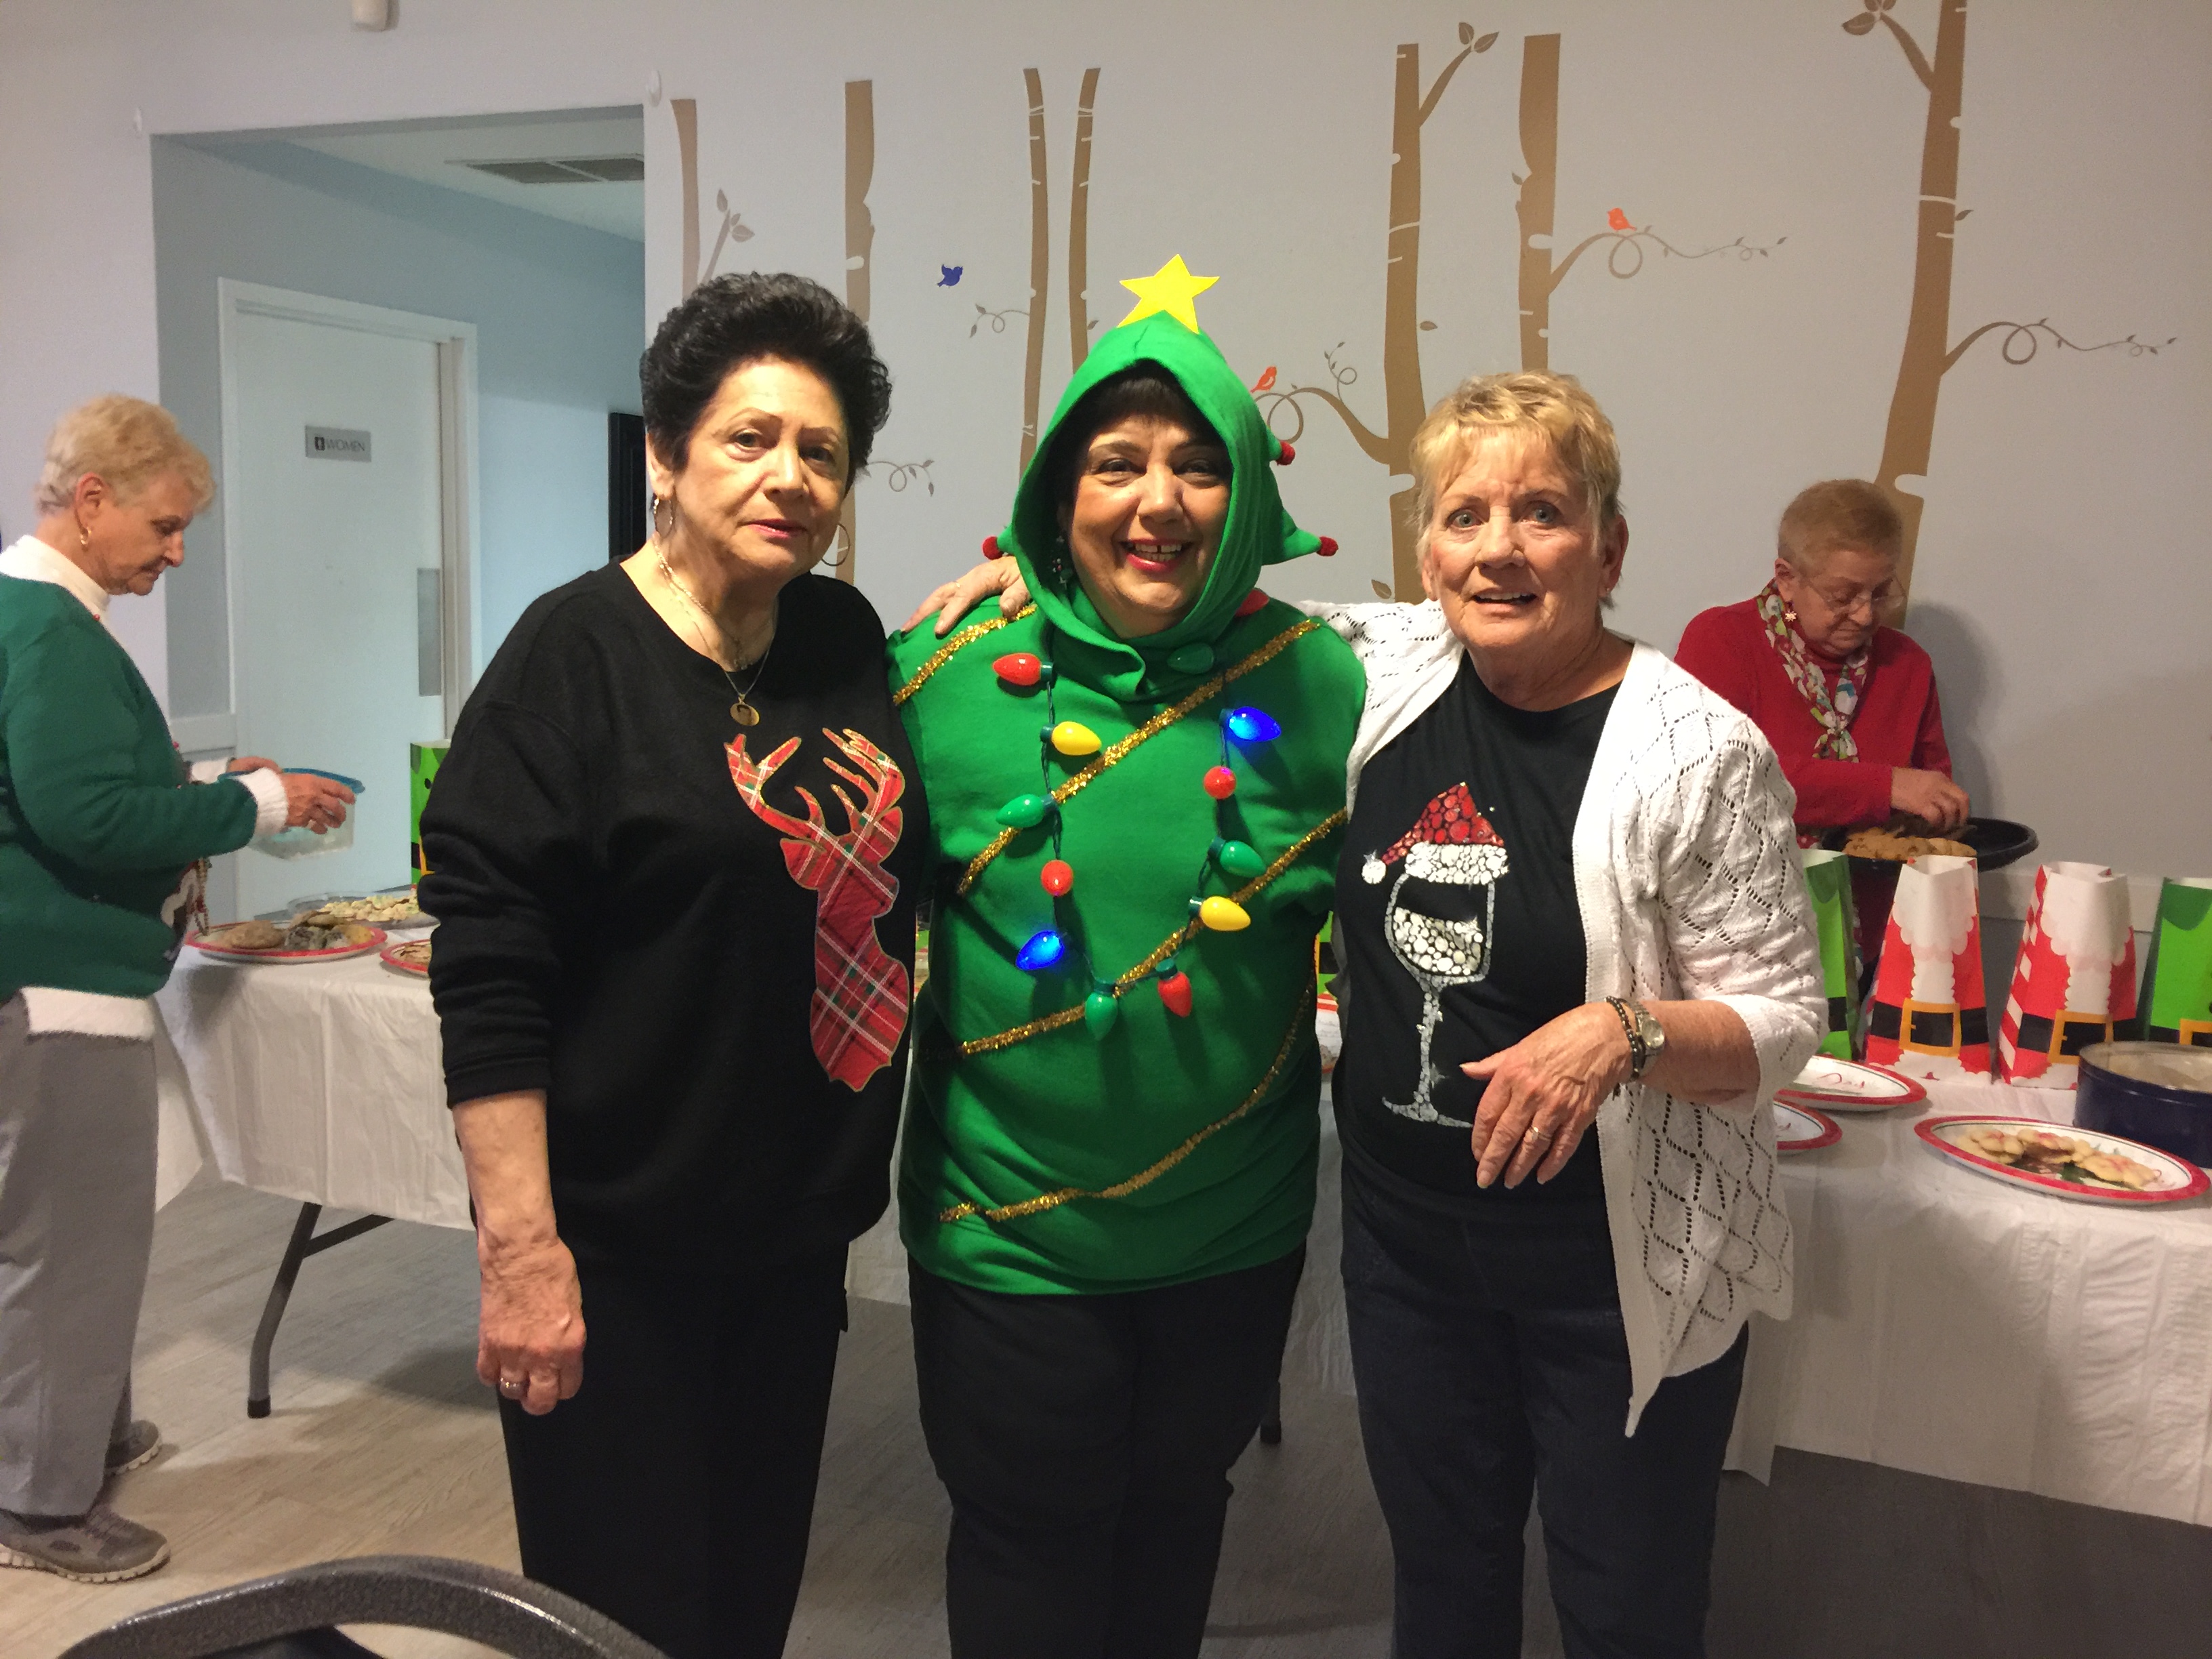 Marlene, Gail, and Jane at the Cookie Exchange